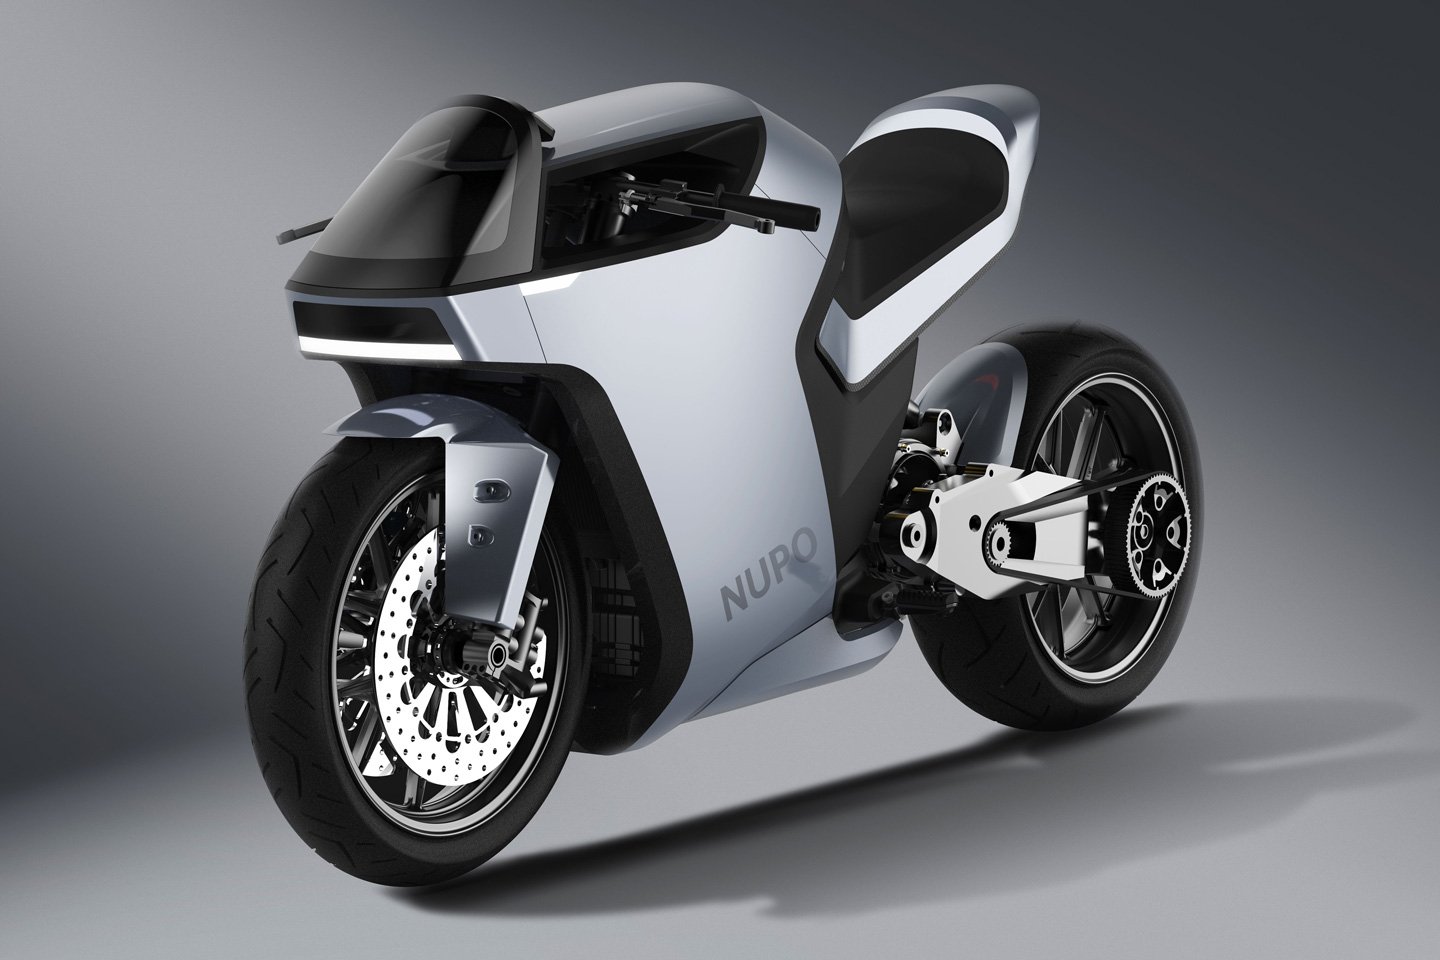 #Here’s the Tesla CyberBike nobody ever asked for but everyone secretly wanted